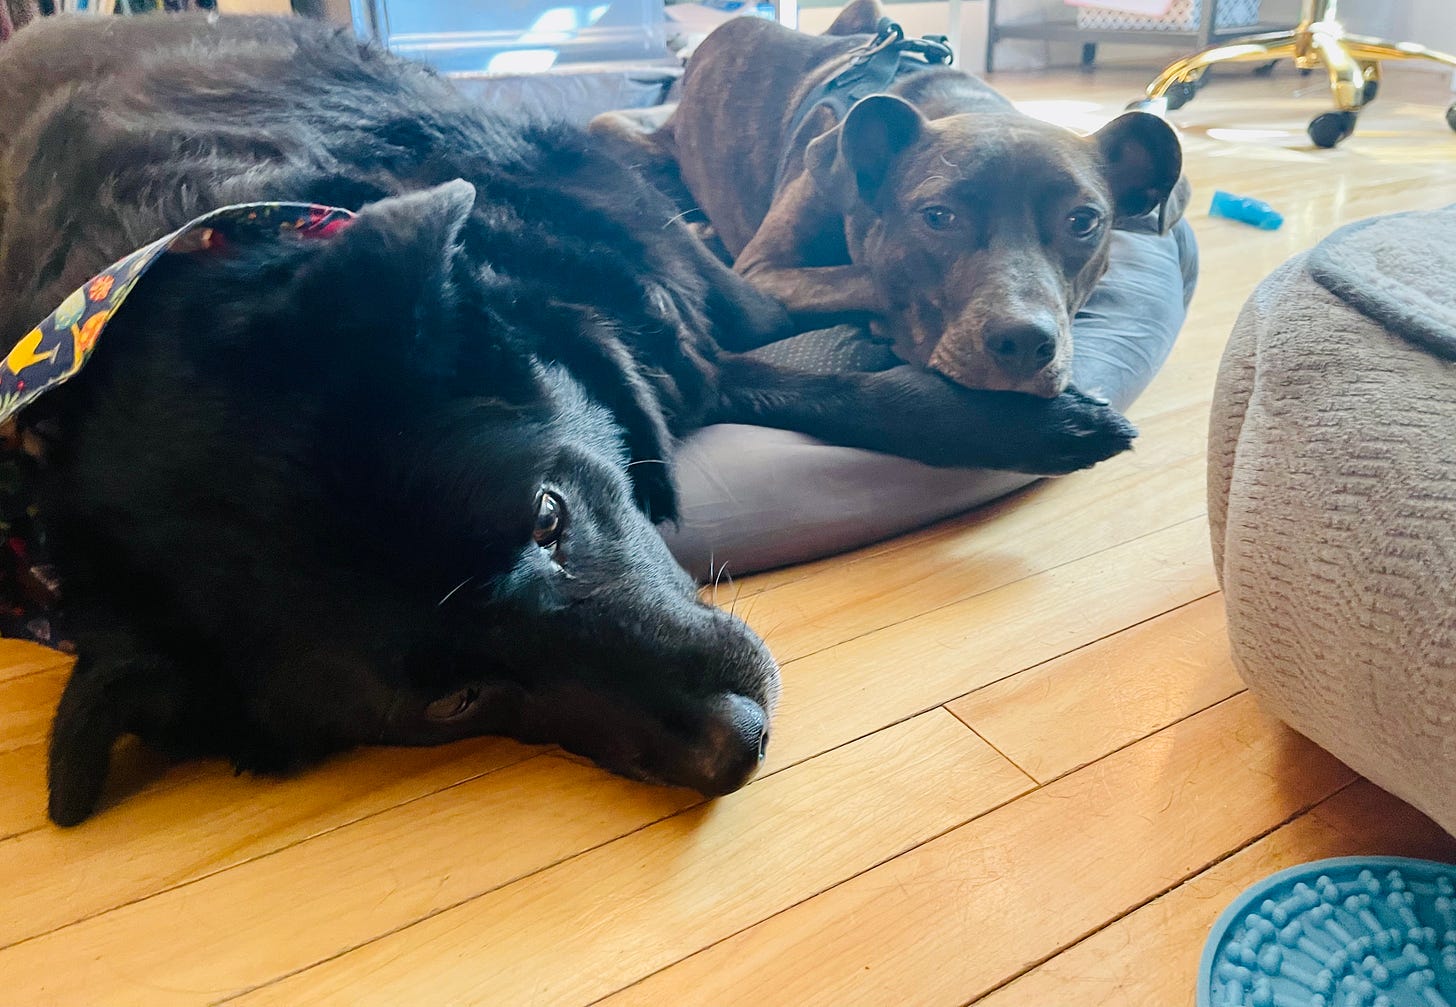 Two dogs flopped on the floor. One dog has her head on the bigger dog's paw and looks concerned. 